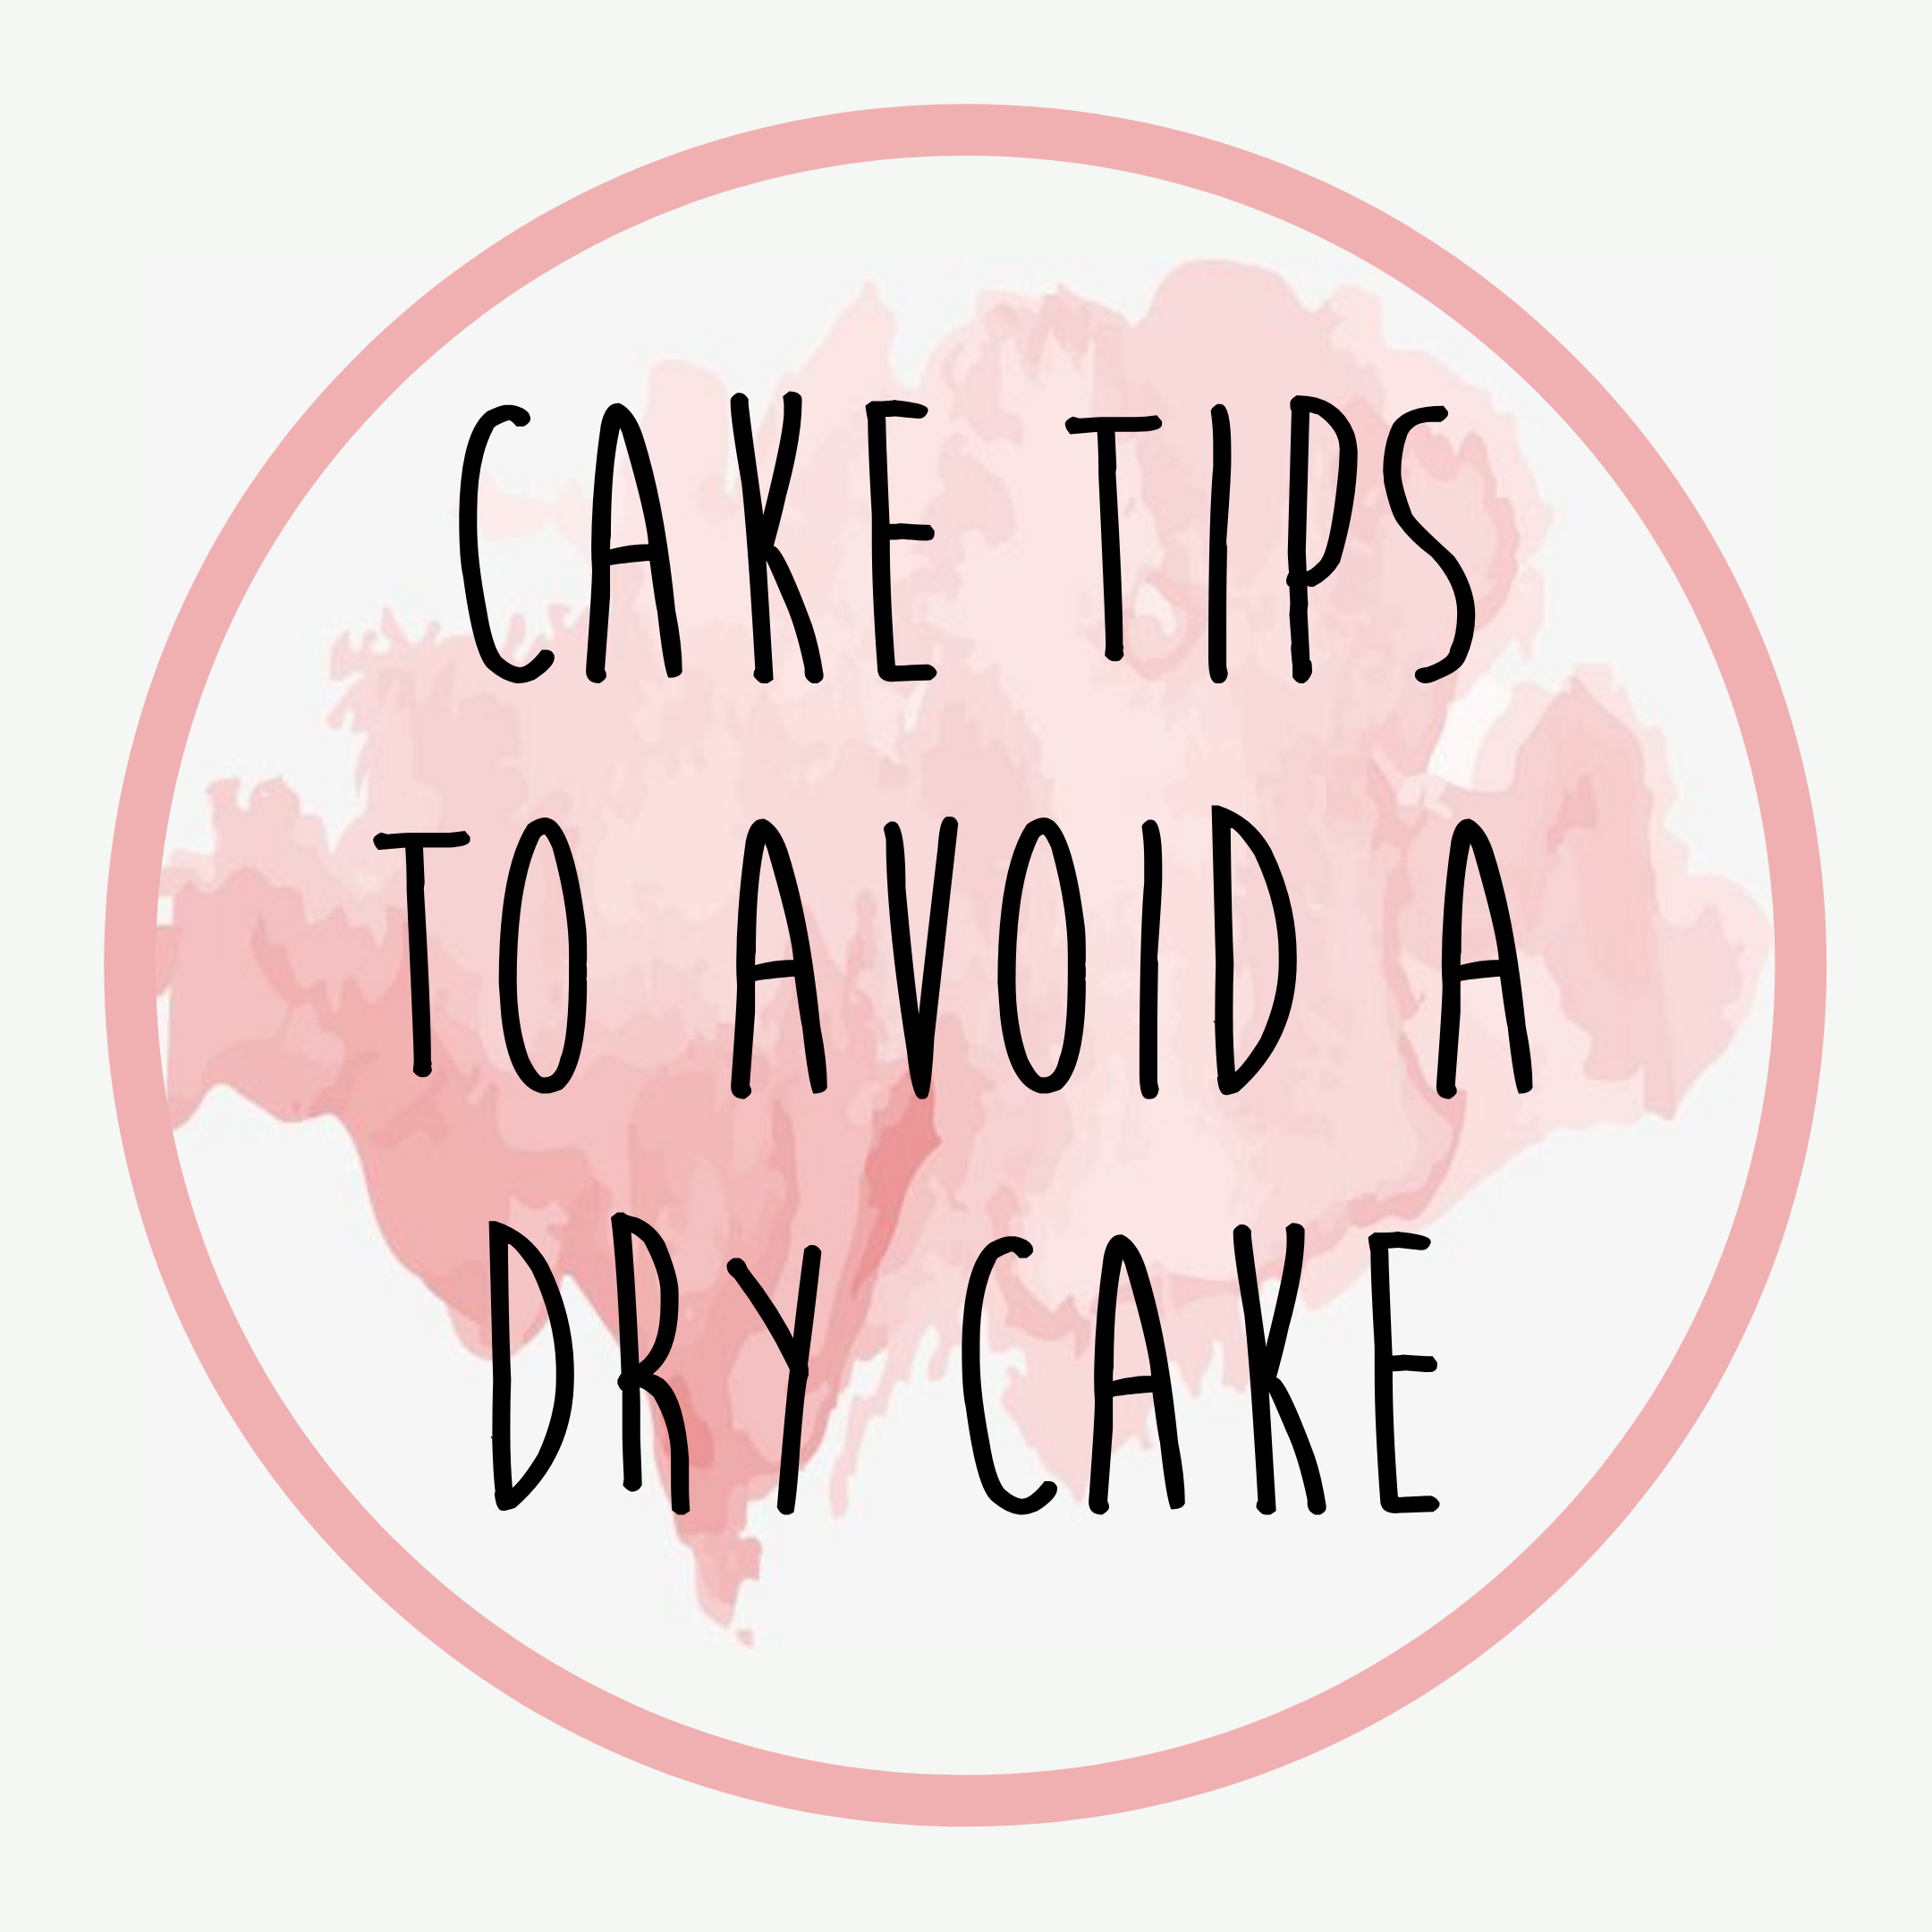 Cake tips to avoid a dry cake